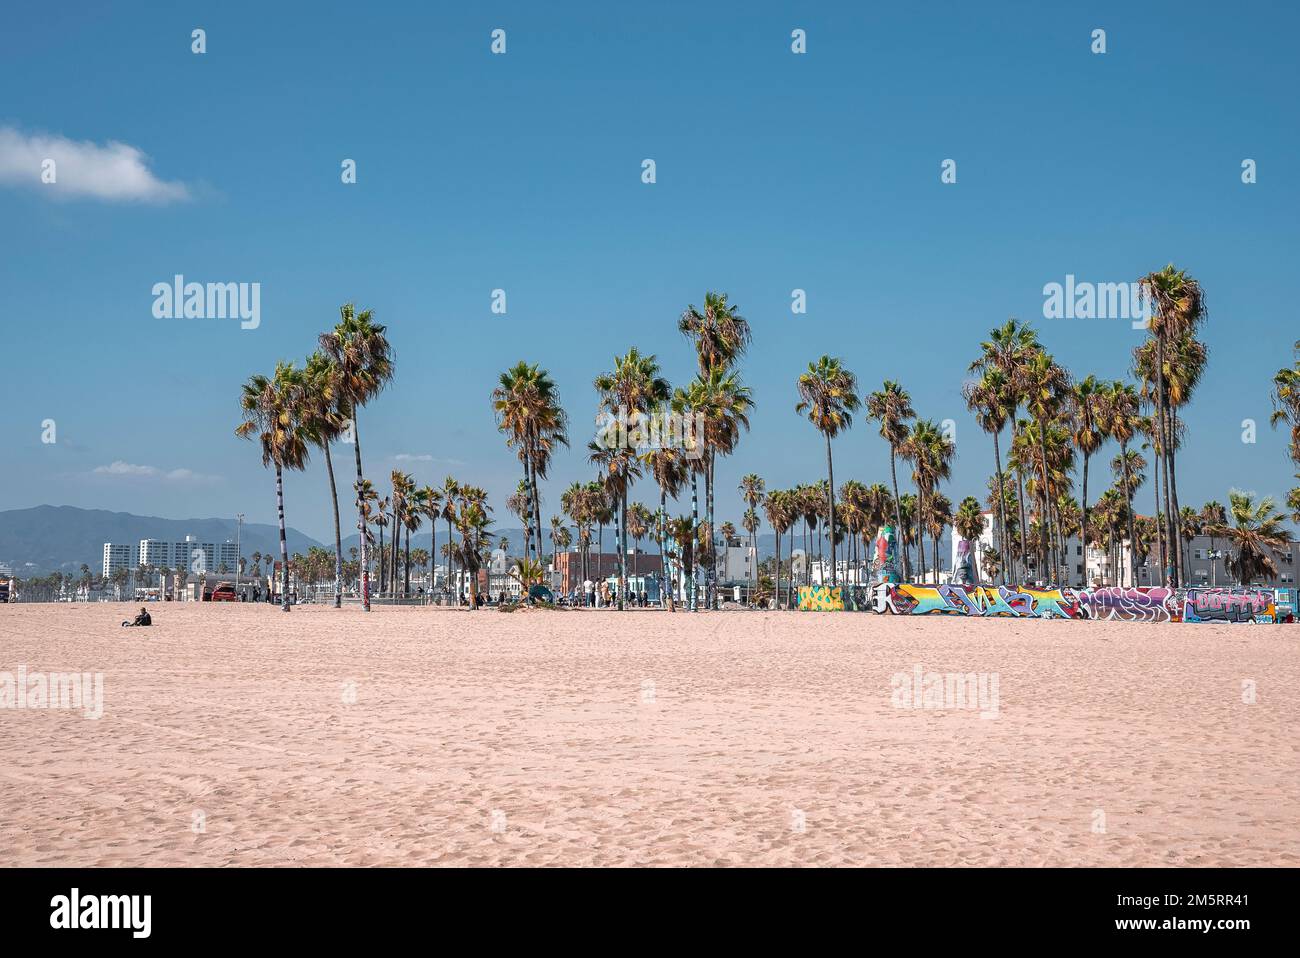 Scenic view of palm trees growing on Venice beach during tropical climate Stock Photo